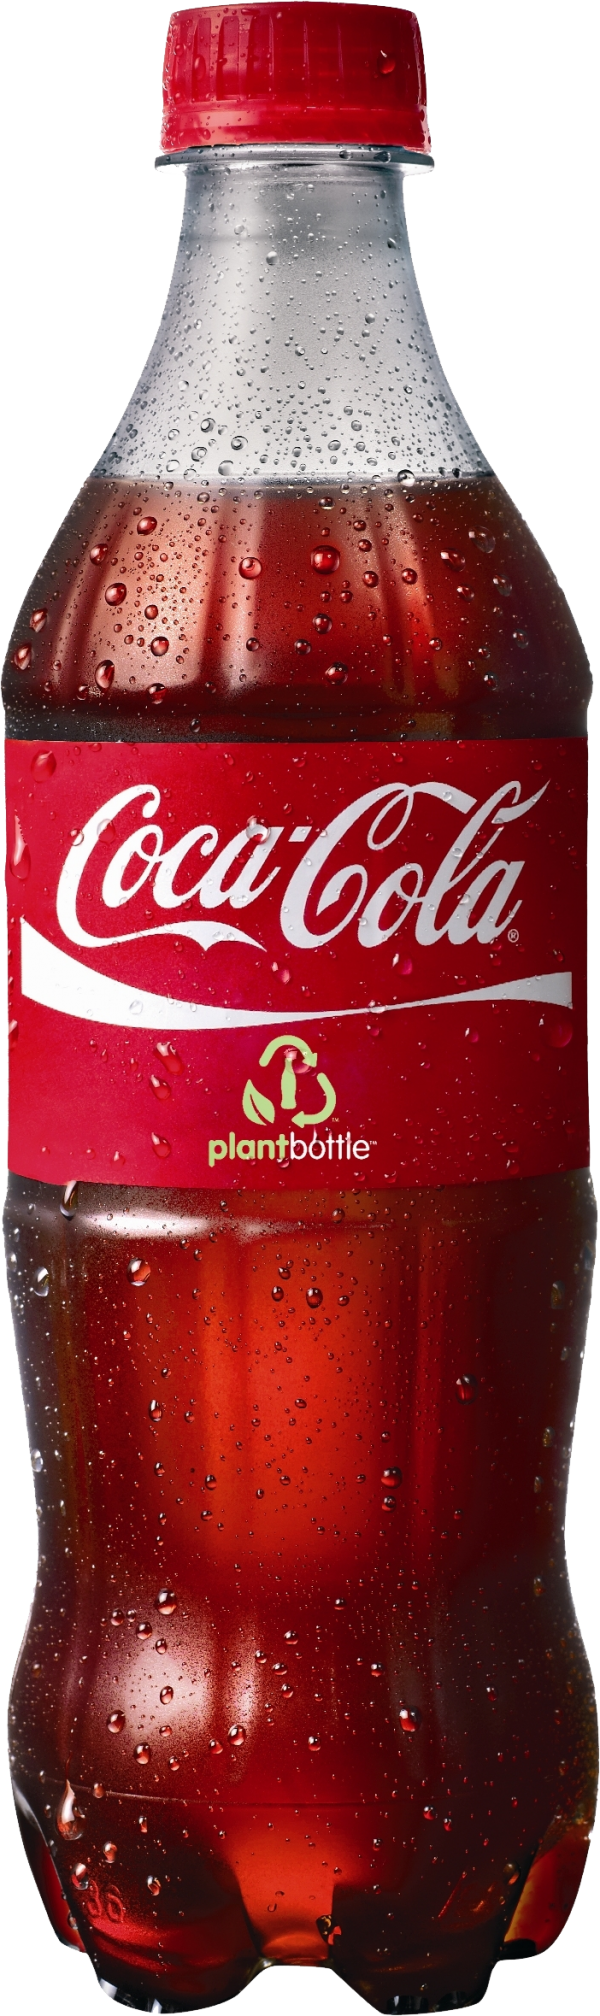 cocacola png free download 7